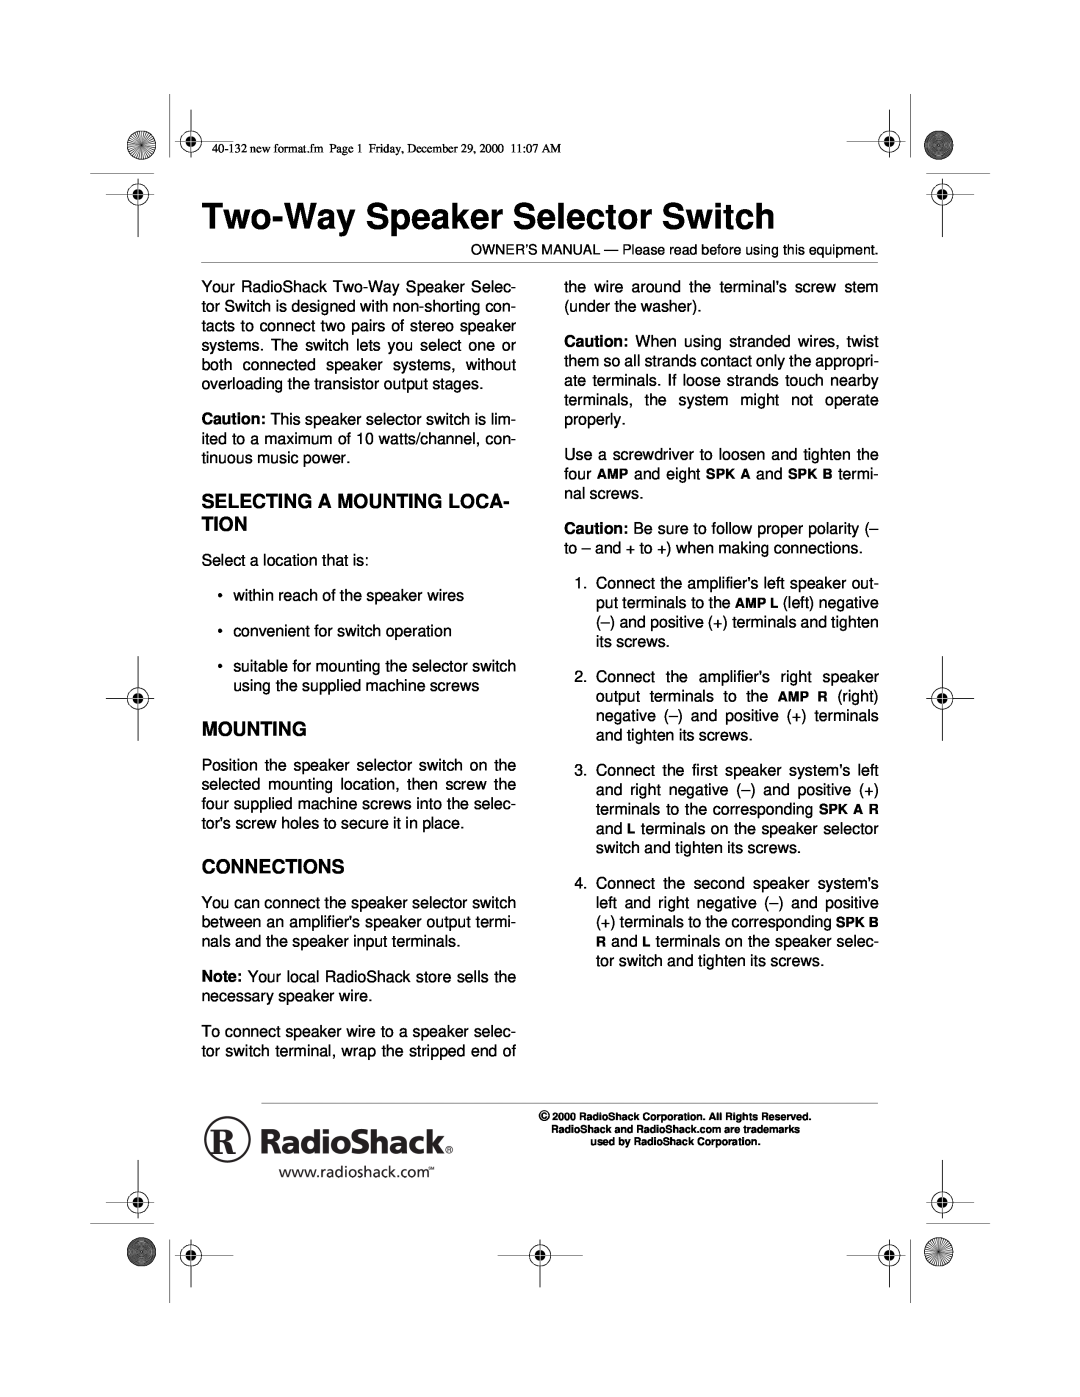 Radio Shack owner manual Selecting A Mounting Loca- Tion, Connections, Two-Way Speaker Selector Switch 